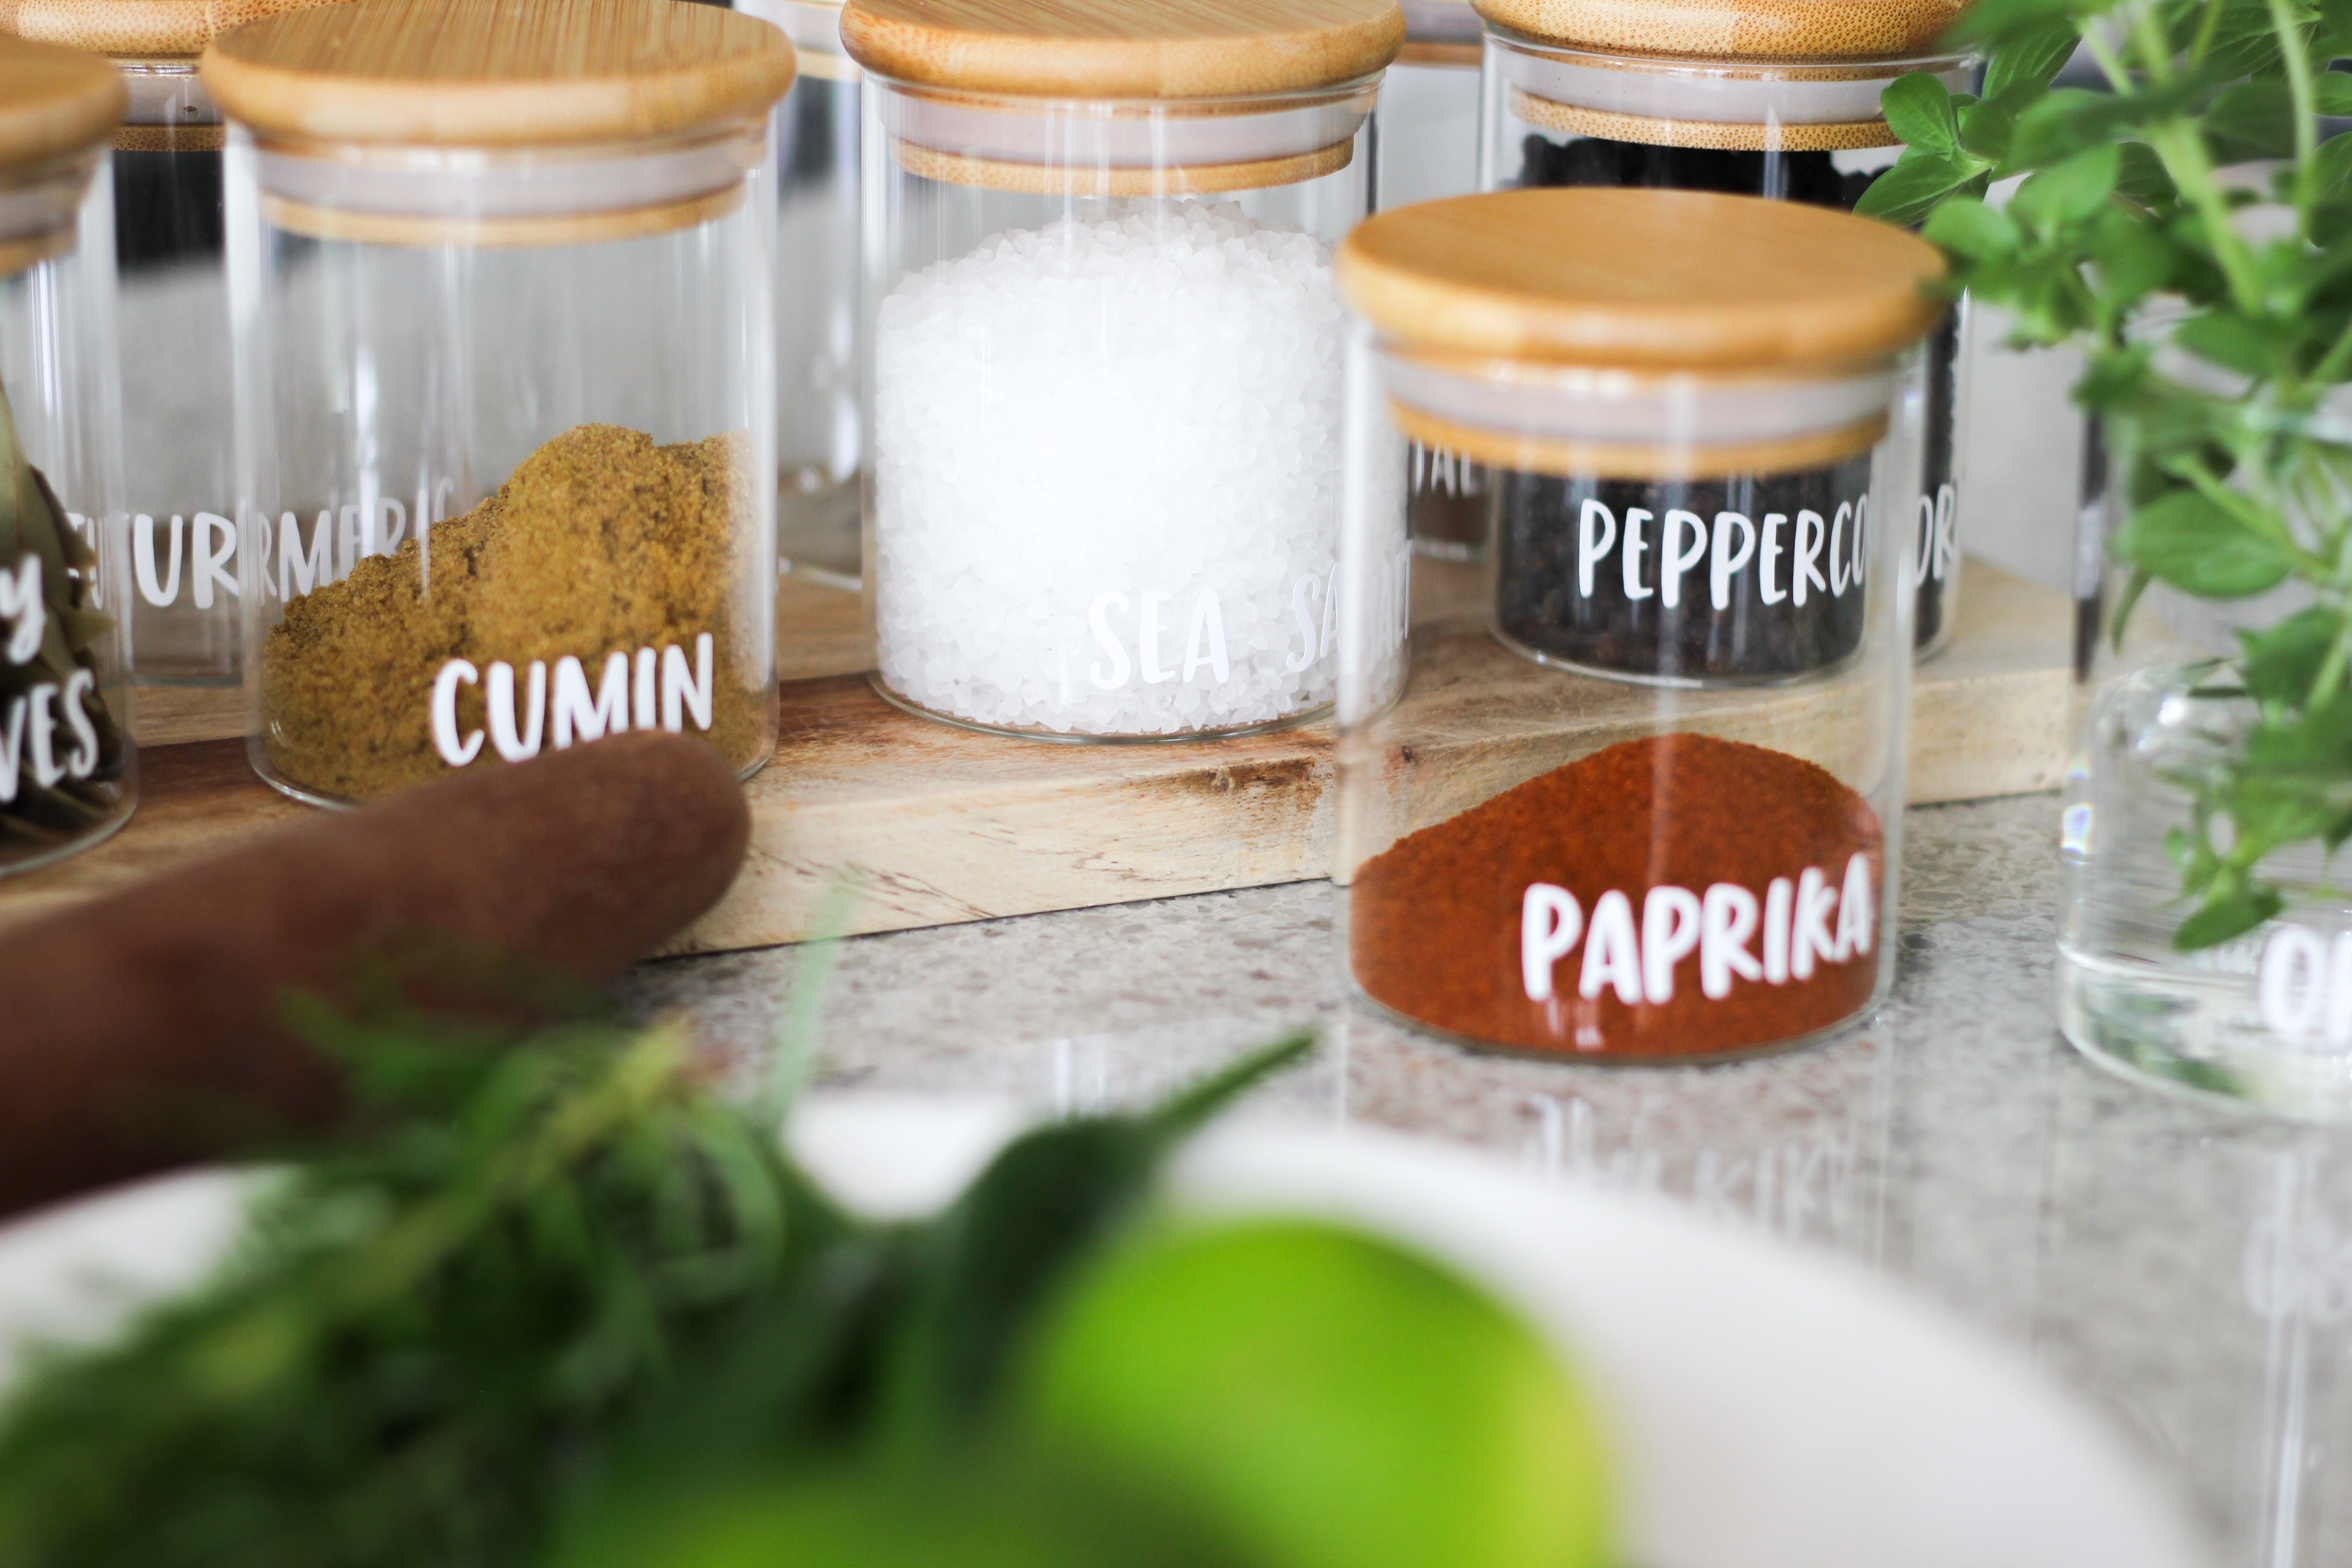 75ml Bamboo Herb and Spice Jars, Kitchen Organisation